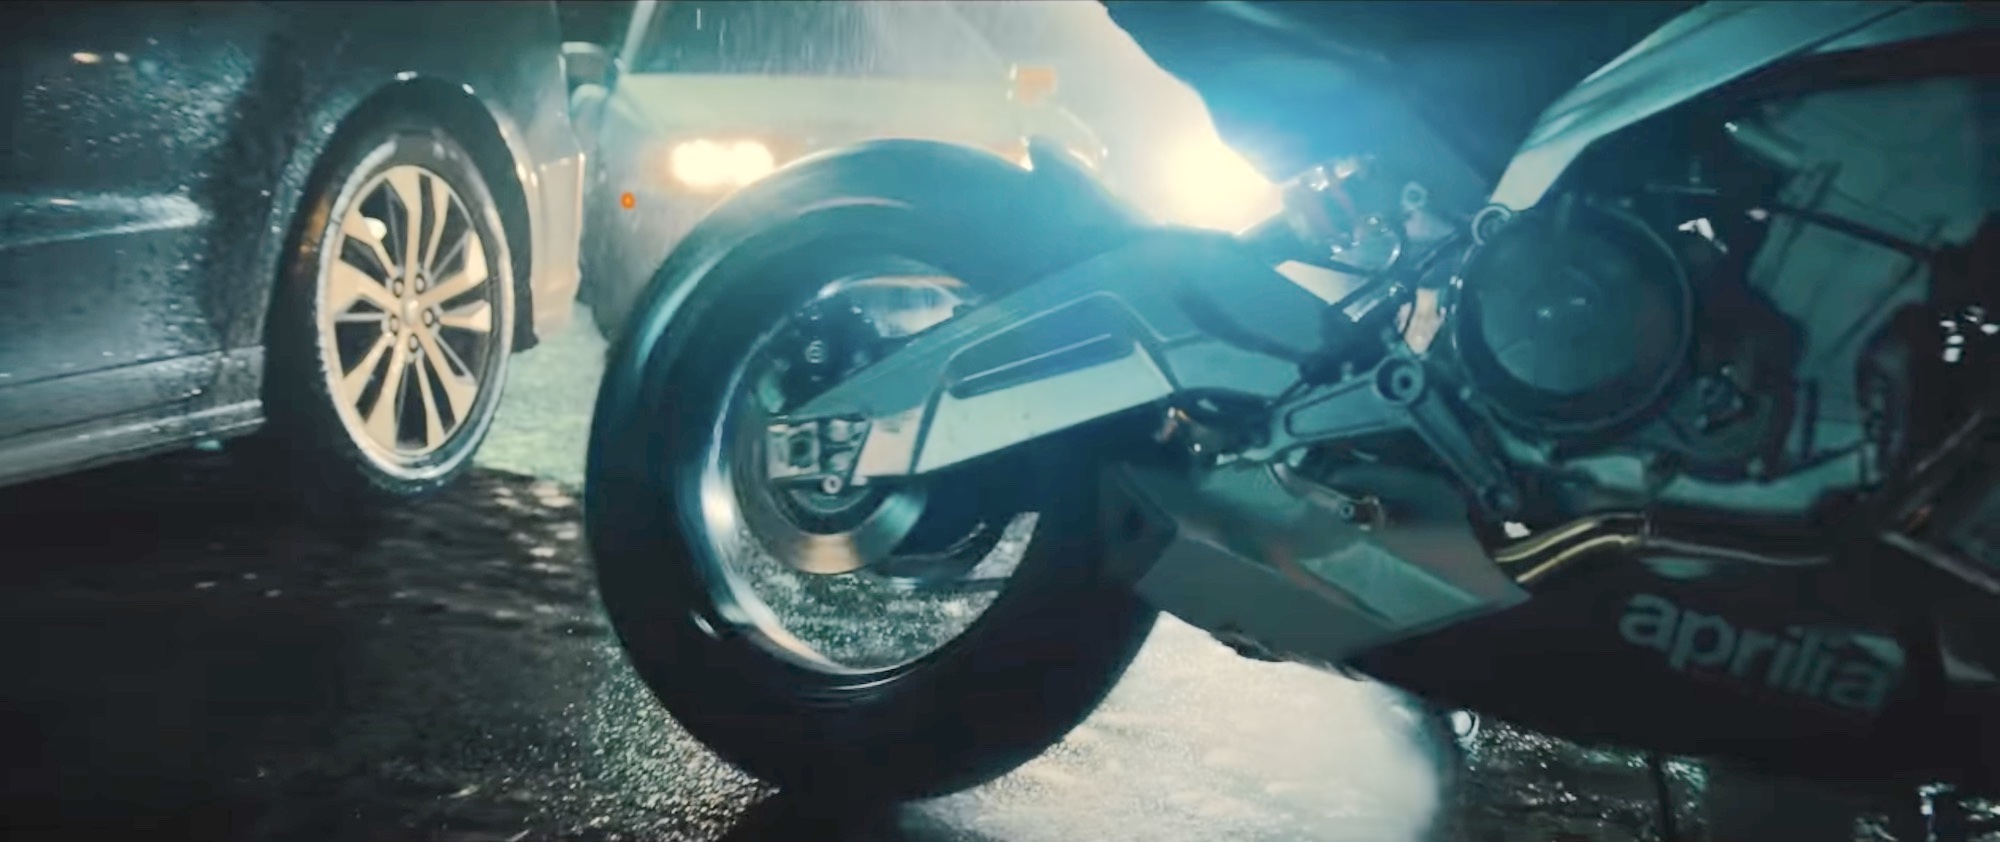 The Aprilia Tuono featured in "John Wick: Chapter 4" (2023). Media sourced from Youtube.